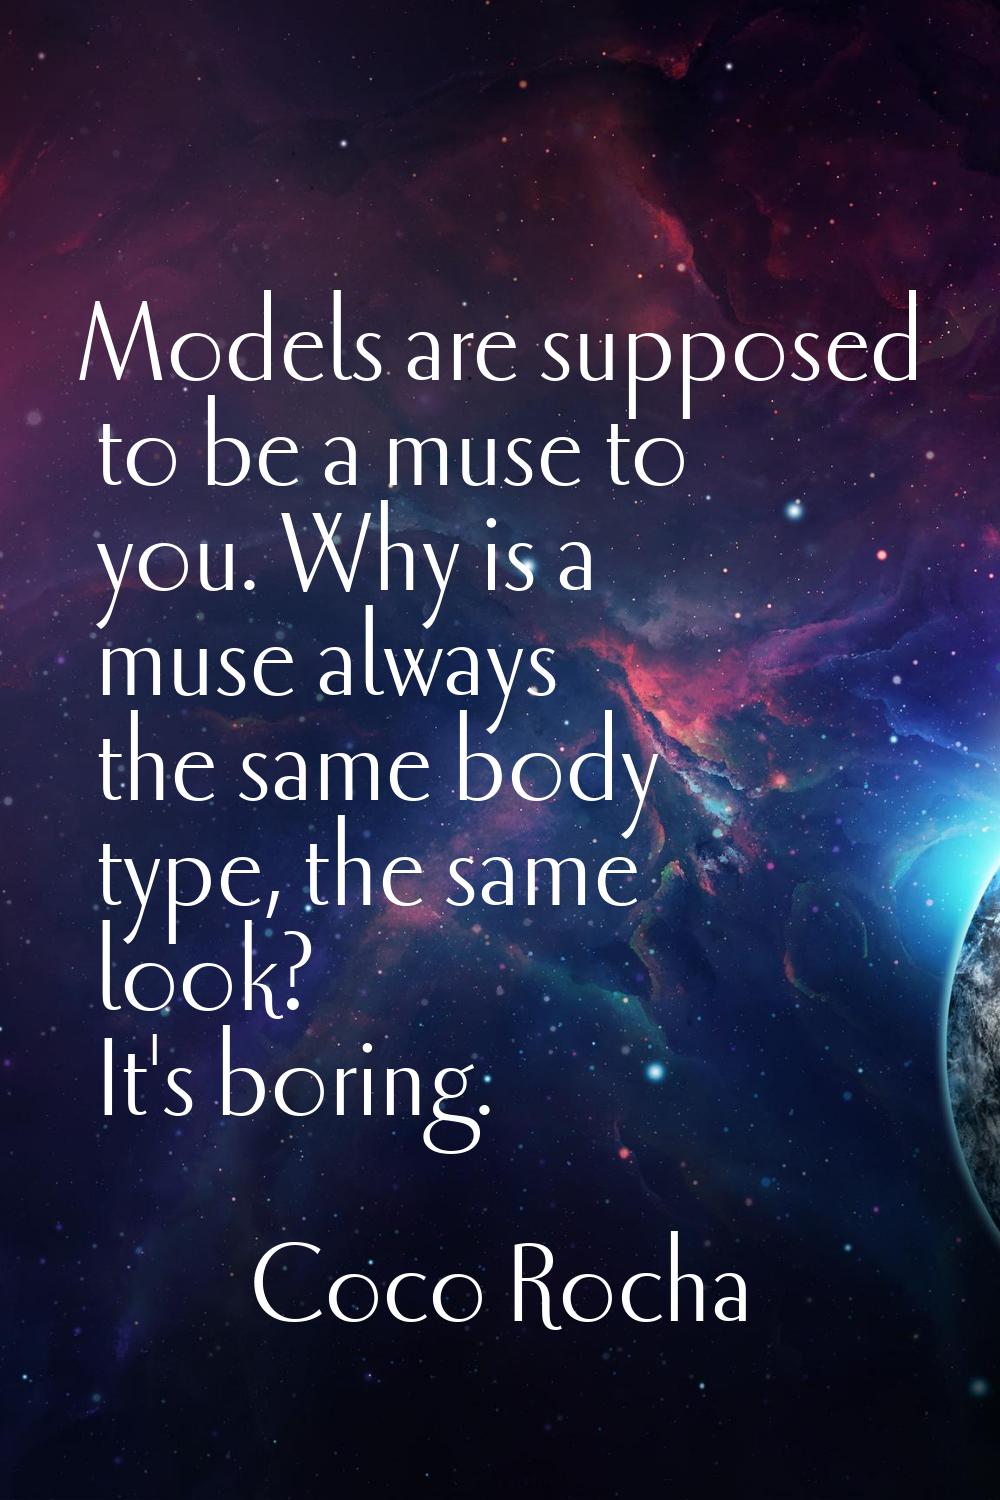 Models are supposed to be a muse to you. Why is a muse always the same body type, the same look? It